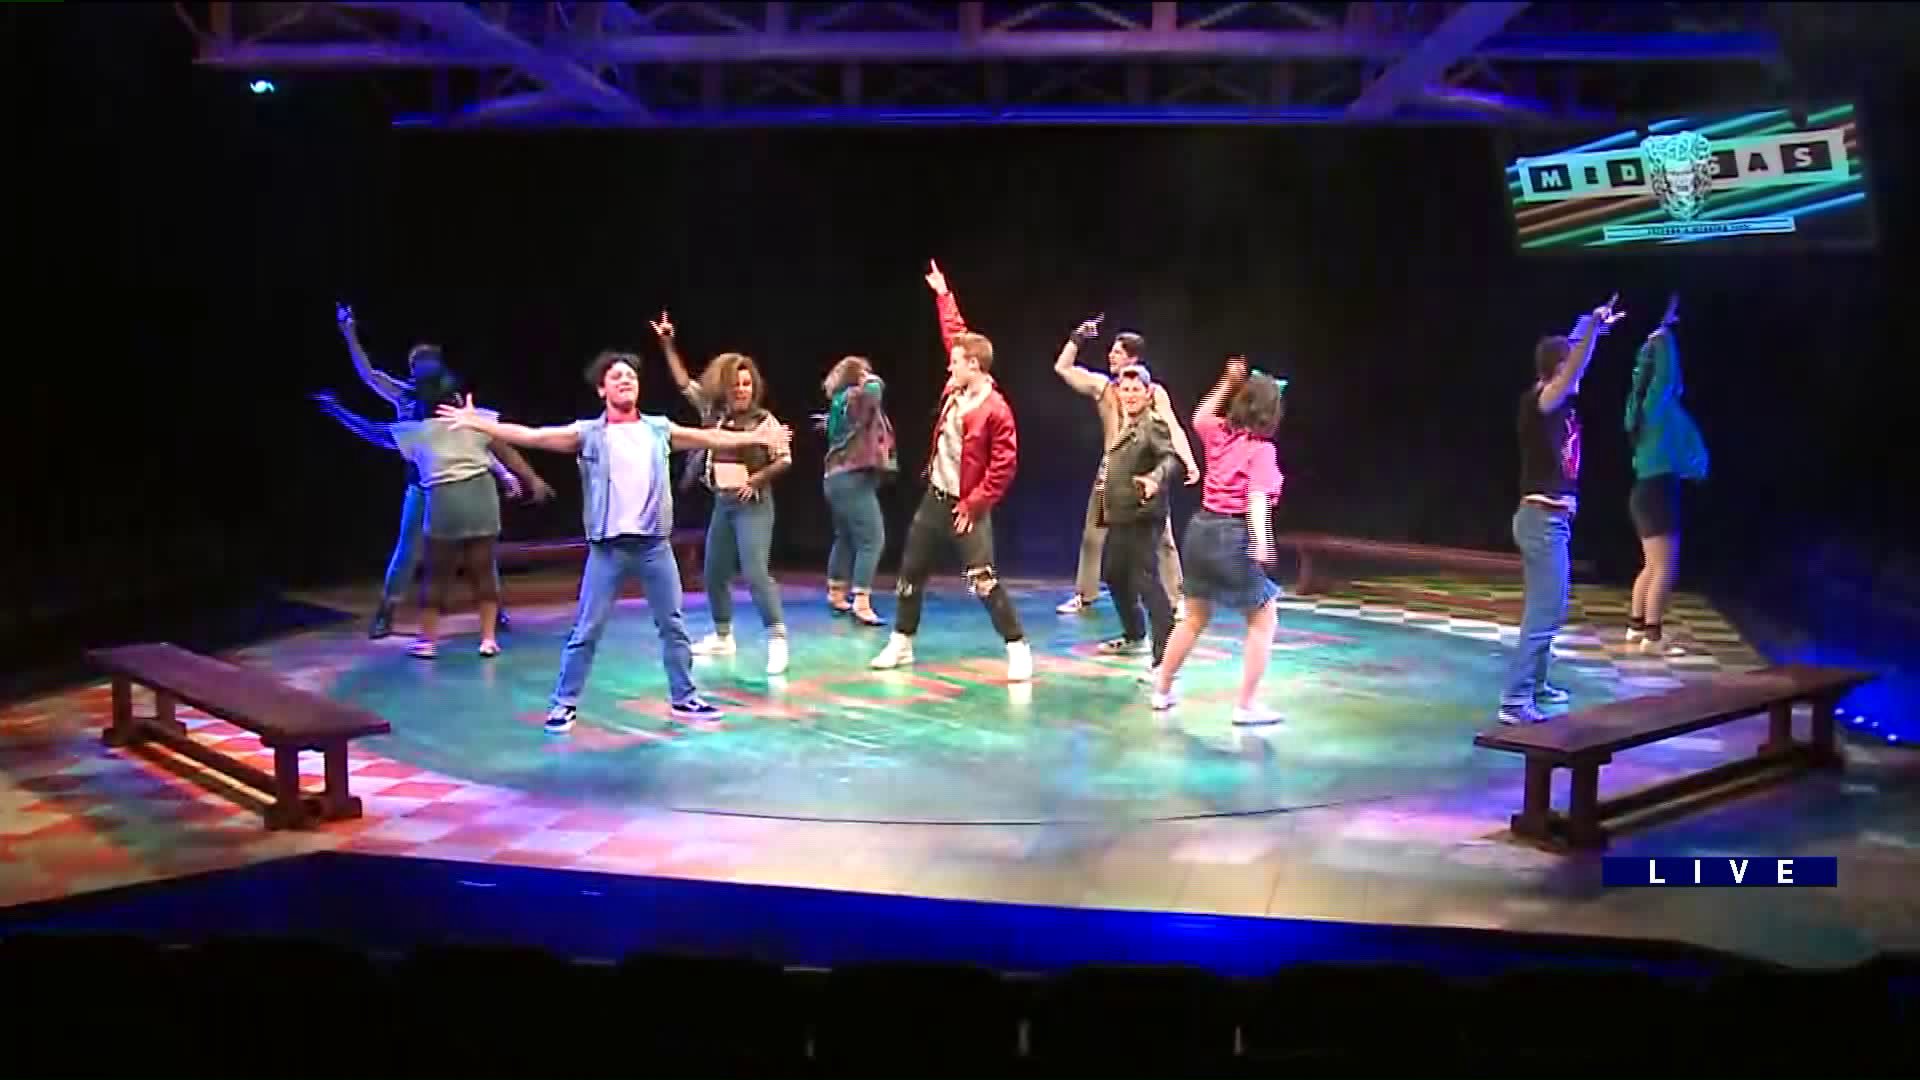 Around Town checks out Marriott Theatre’s performance of ‘Footloose’